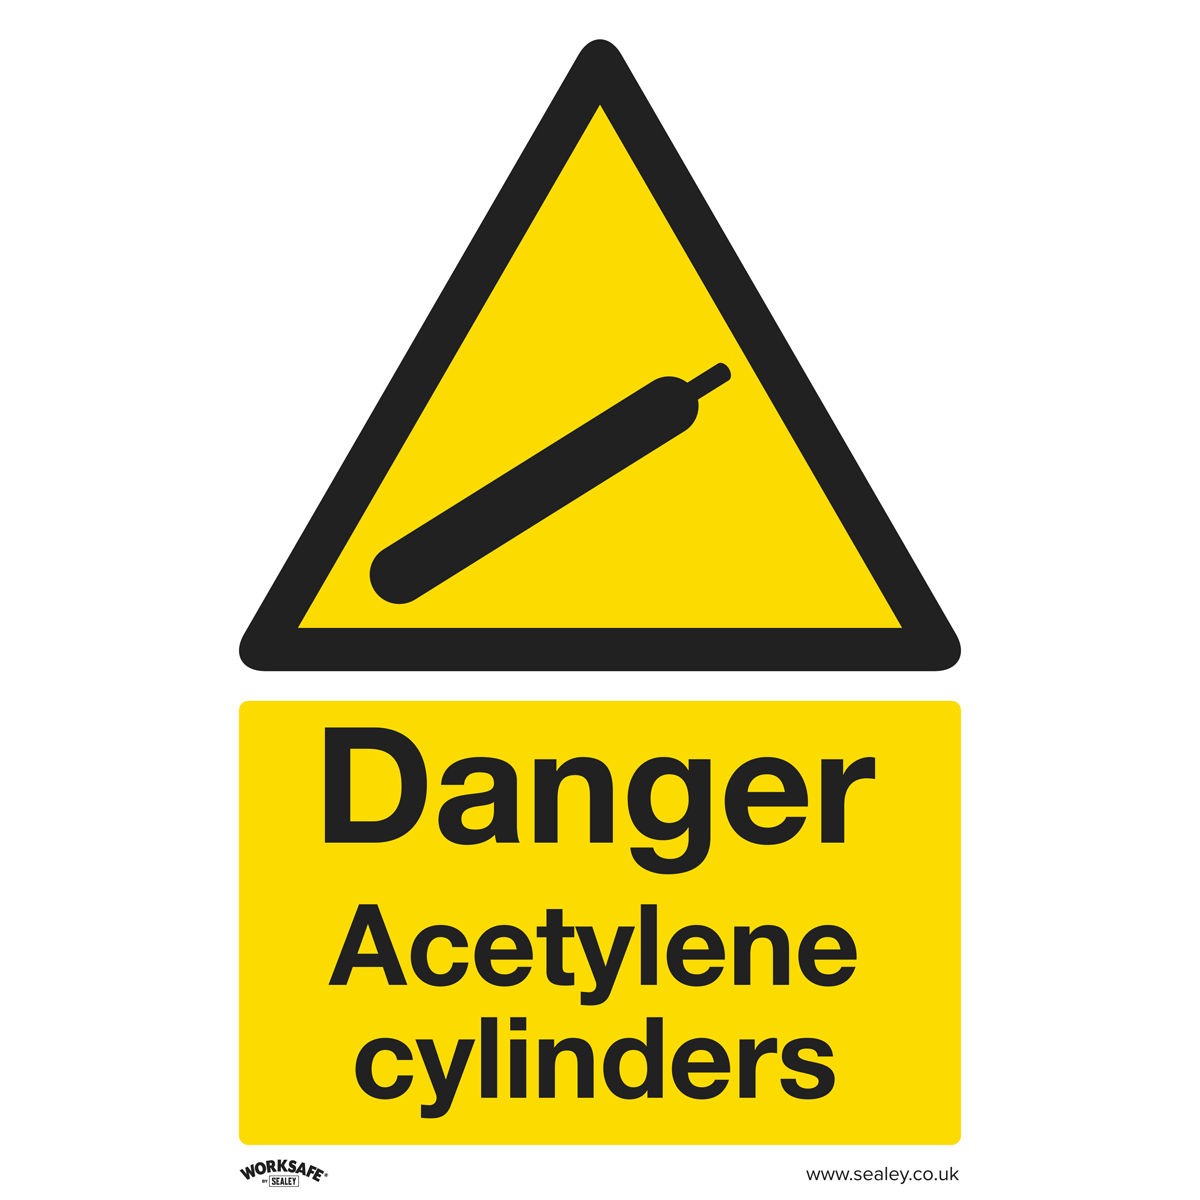 Sealey Warning Safety Sign - Danger Acetylene Cylinders - Rigid Plastic - Pack of 10